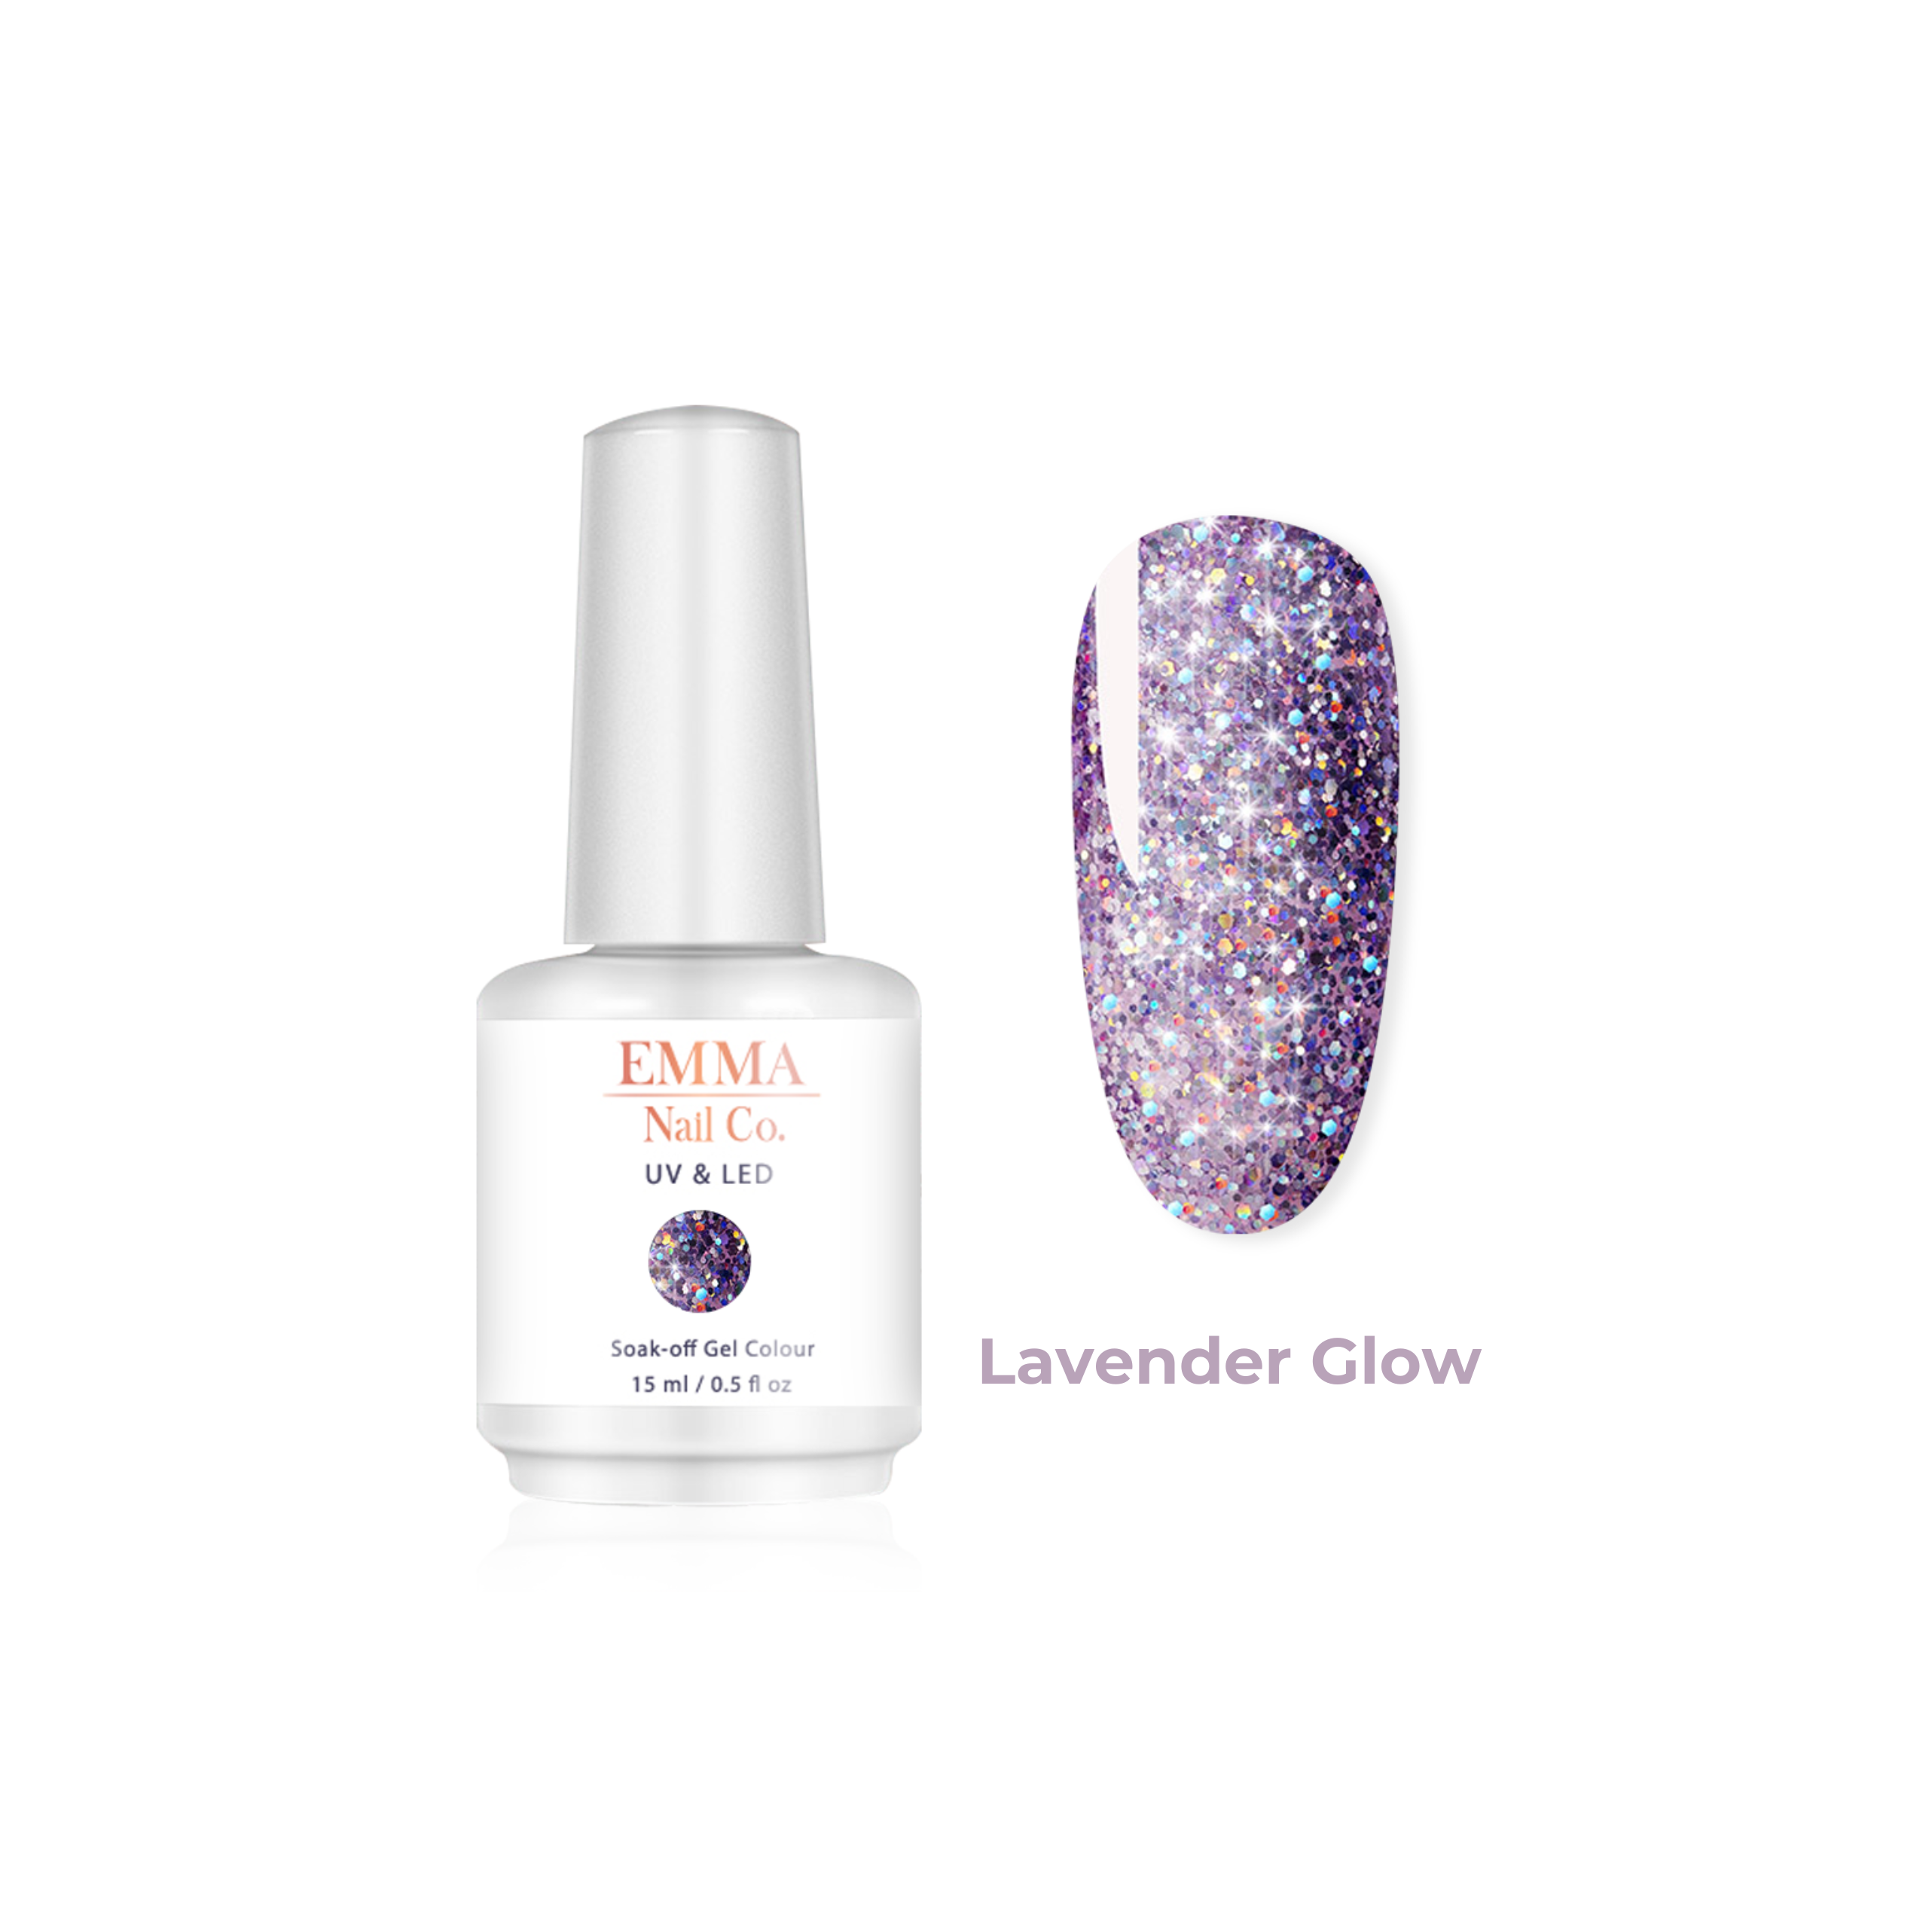 Gel Glitter Collection – EMMA Nail Co.